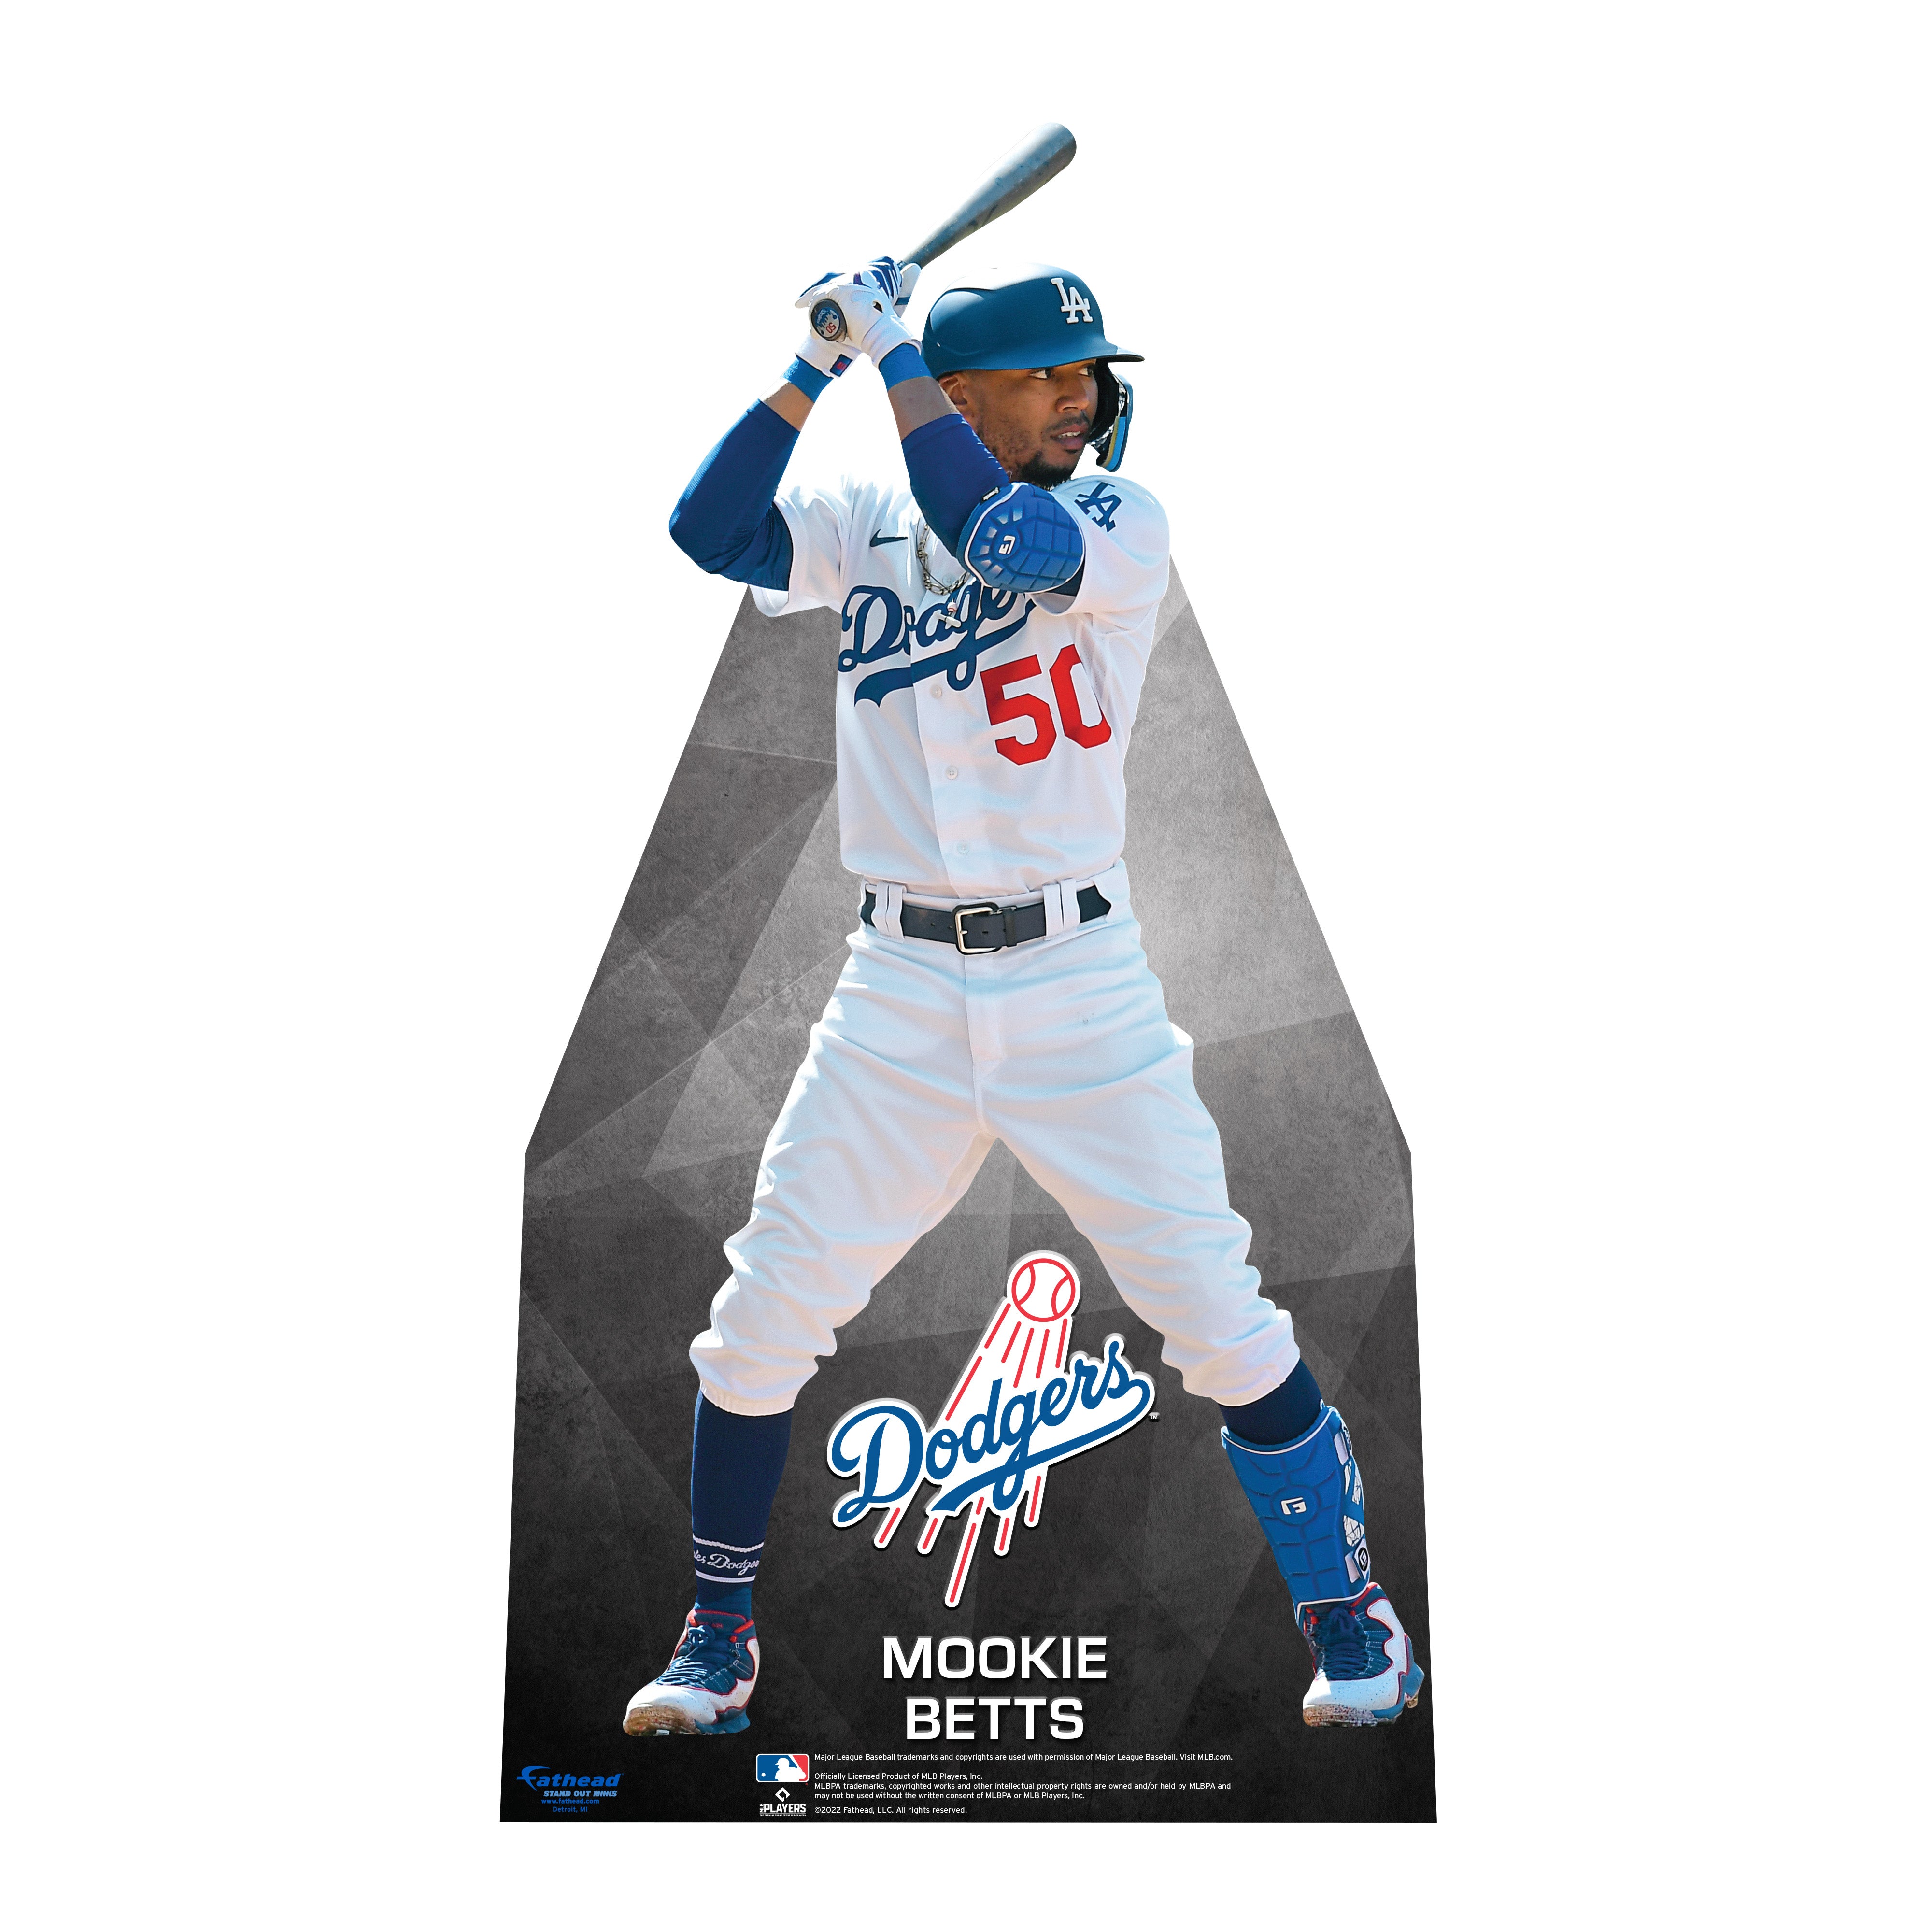 Fernando Tatis Jr: RealBig Officially Licensed MLB Removable Wall Decal